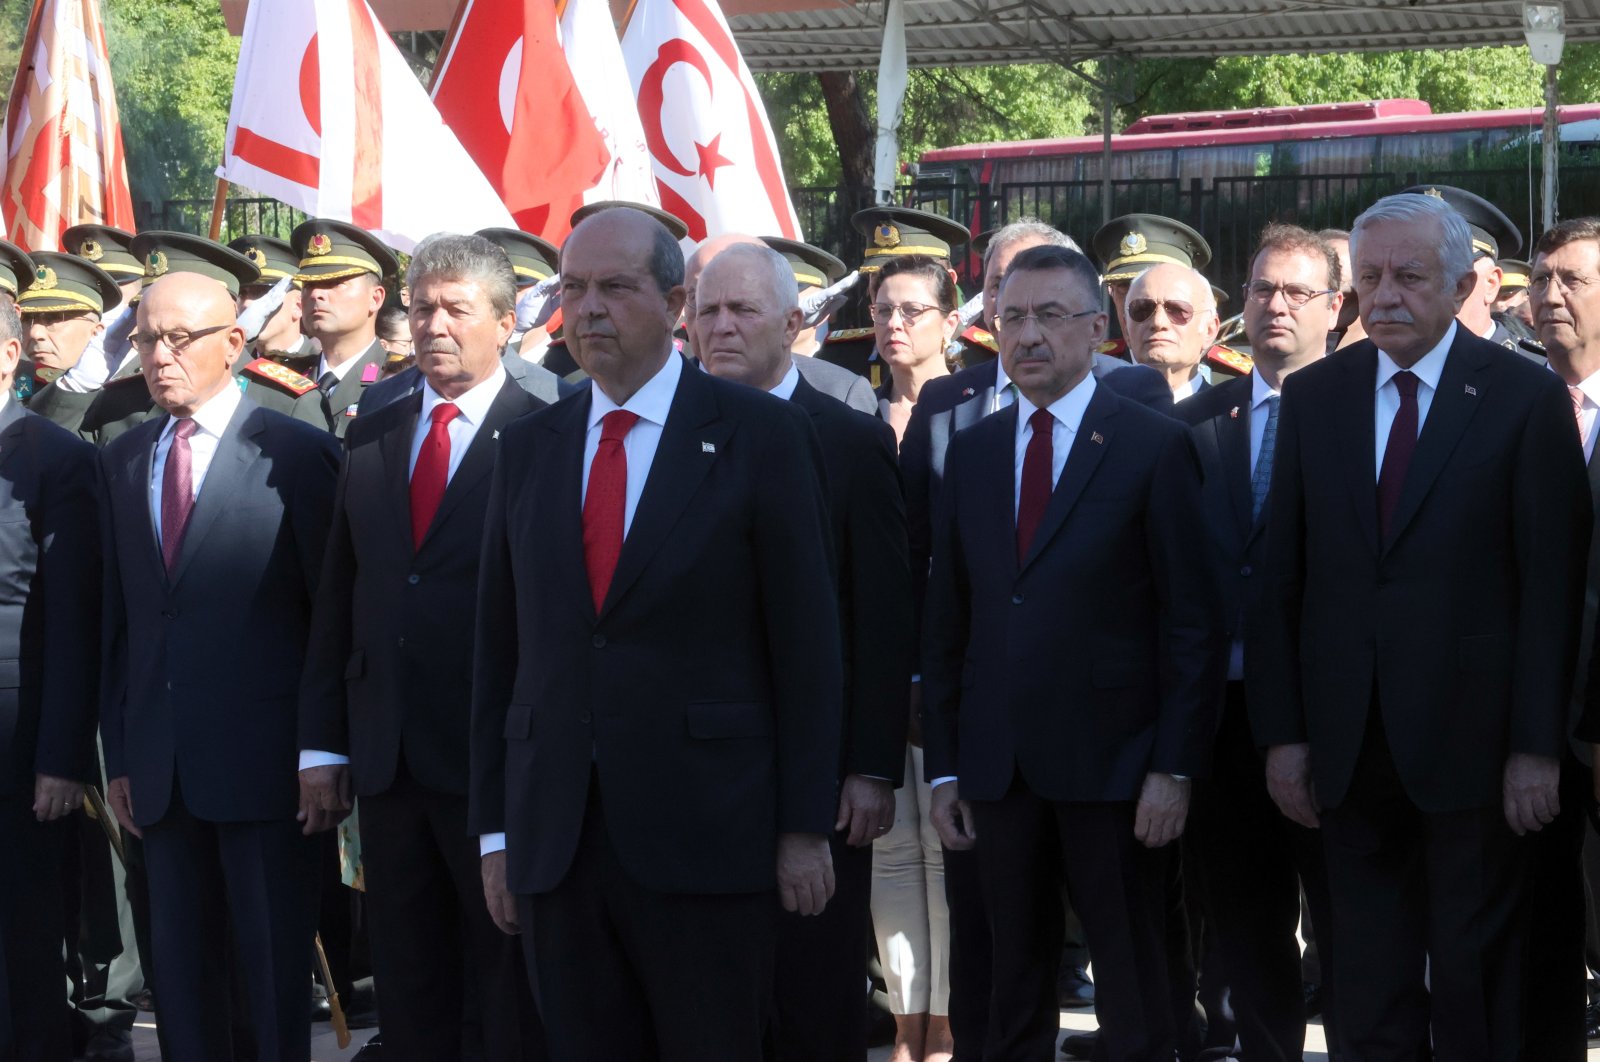 Turkish Cypriot President Ersin Tatar (front) and Turkish Vice President Fuat Oktay (R-2) lay wreaths to the Atatürk Monument in the capital Lefkoşa (Nicosia), TRNC, July 20, 2022. (AA Photo)